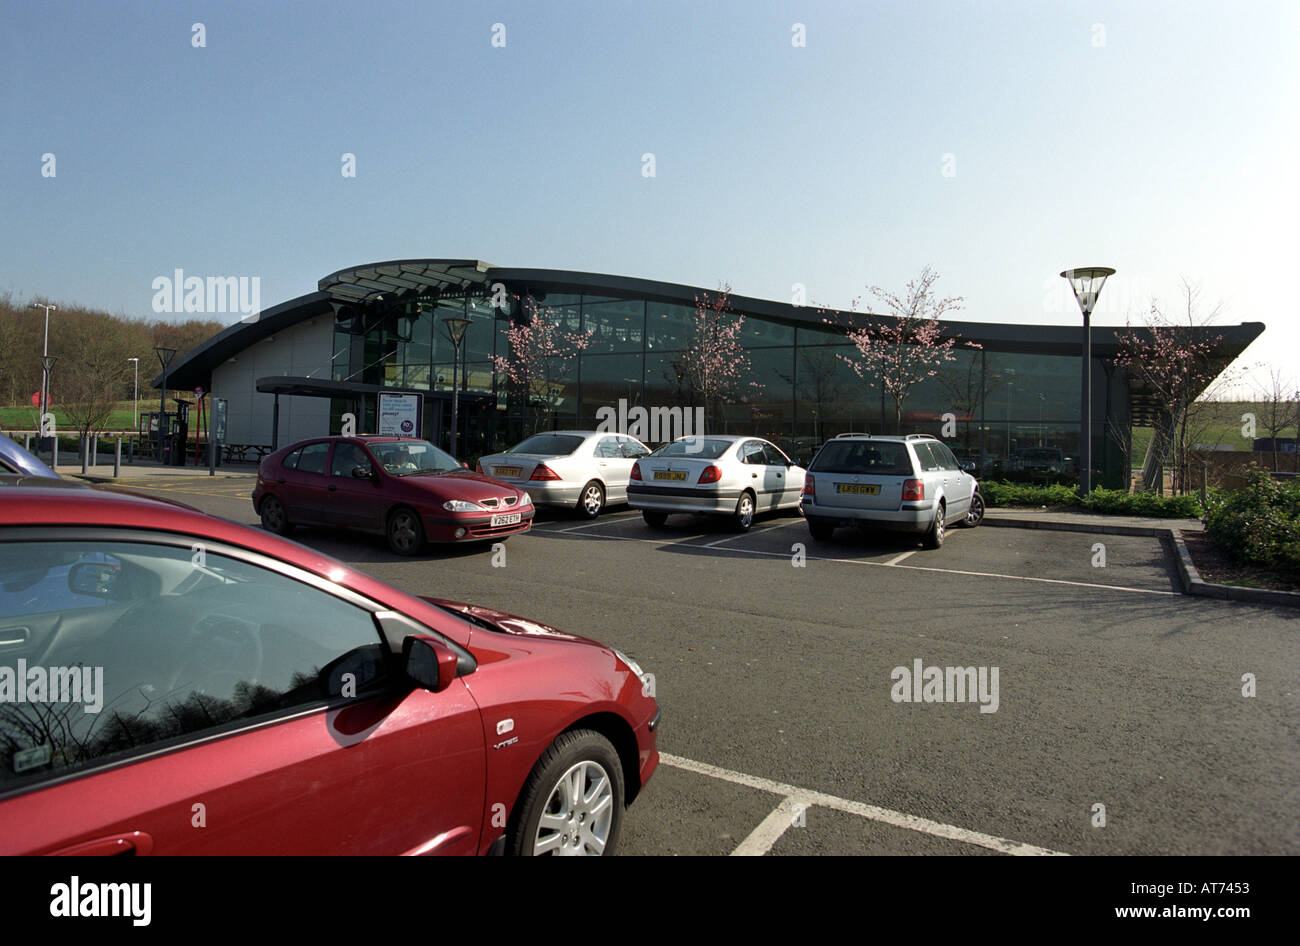 Winchester services on the M3 motorway Stock Photo